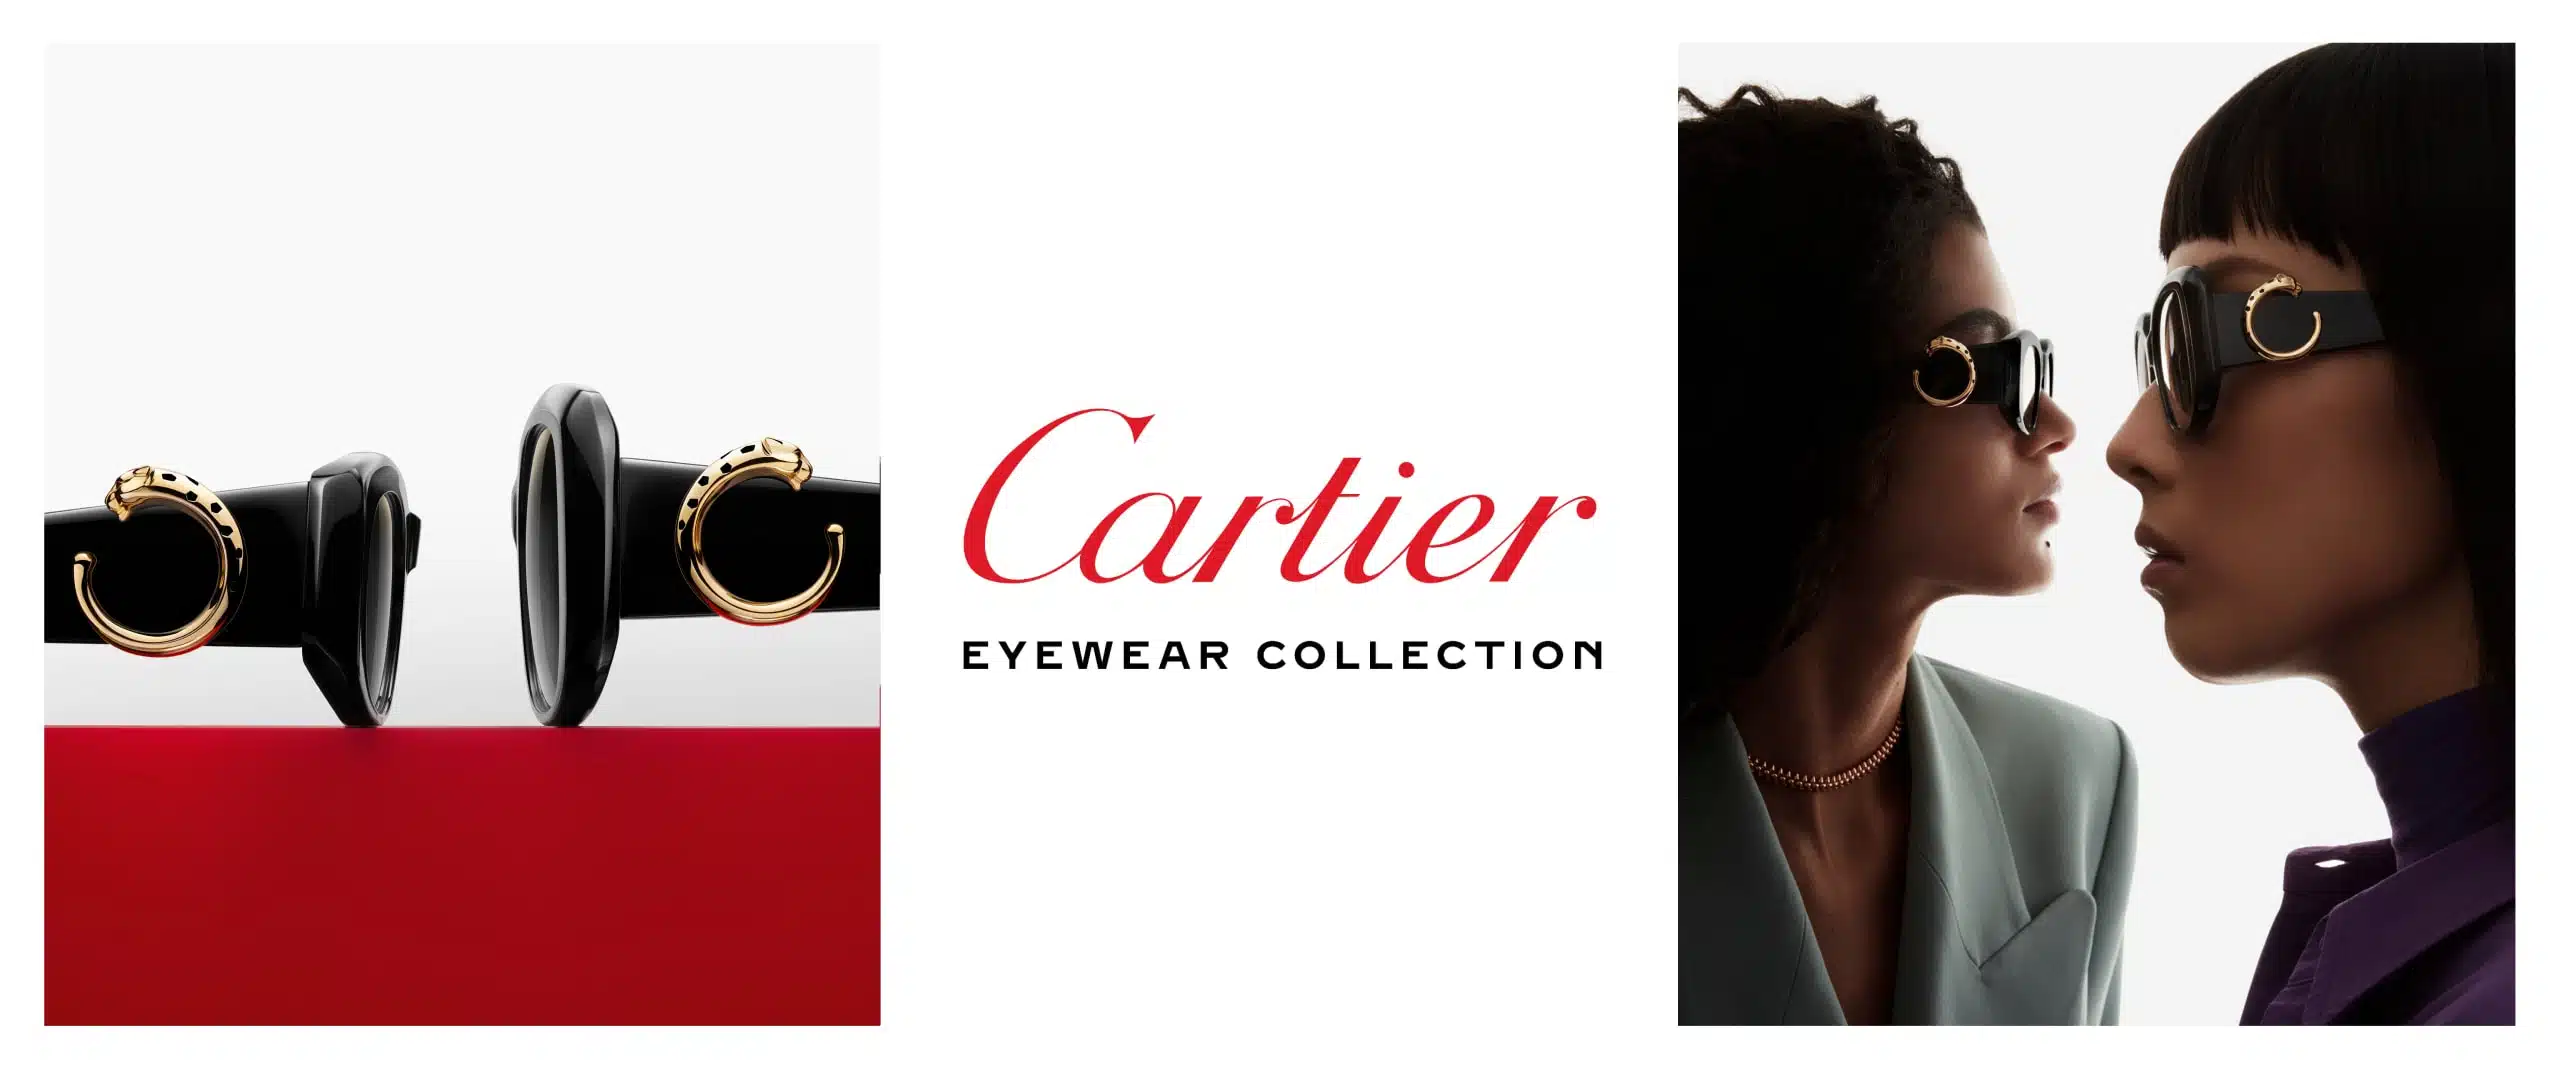 Cartier Glasses 3 Collection Image